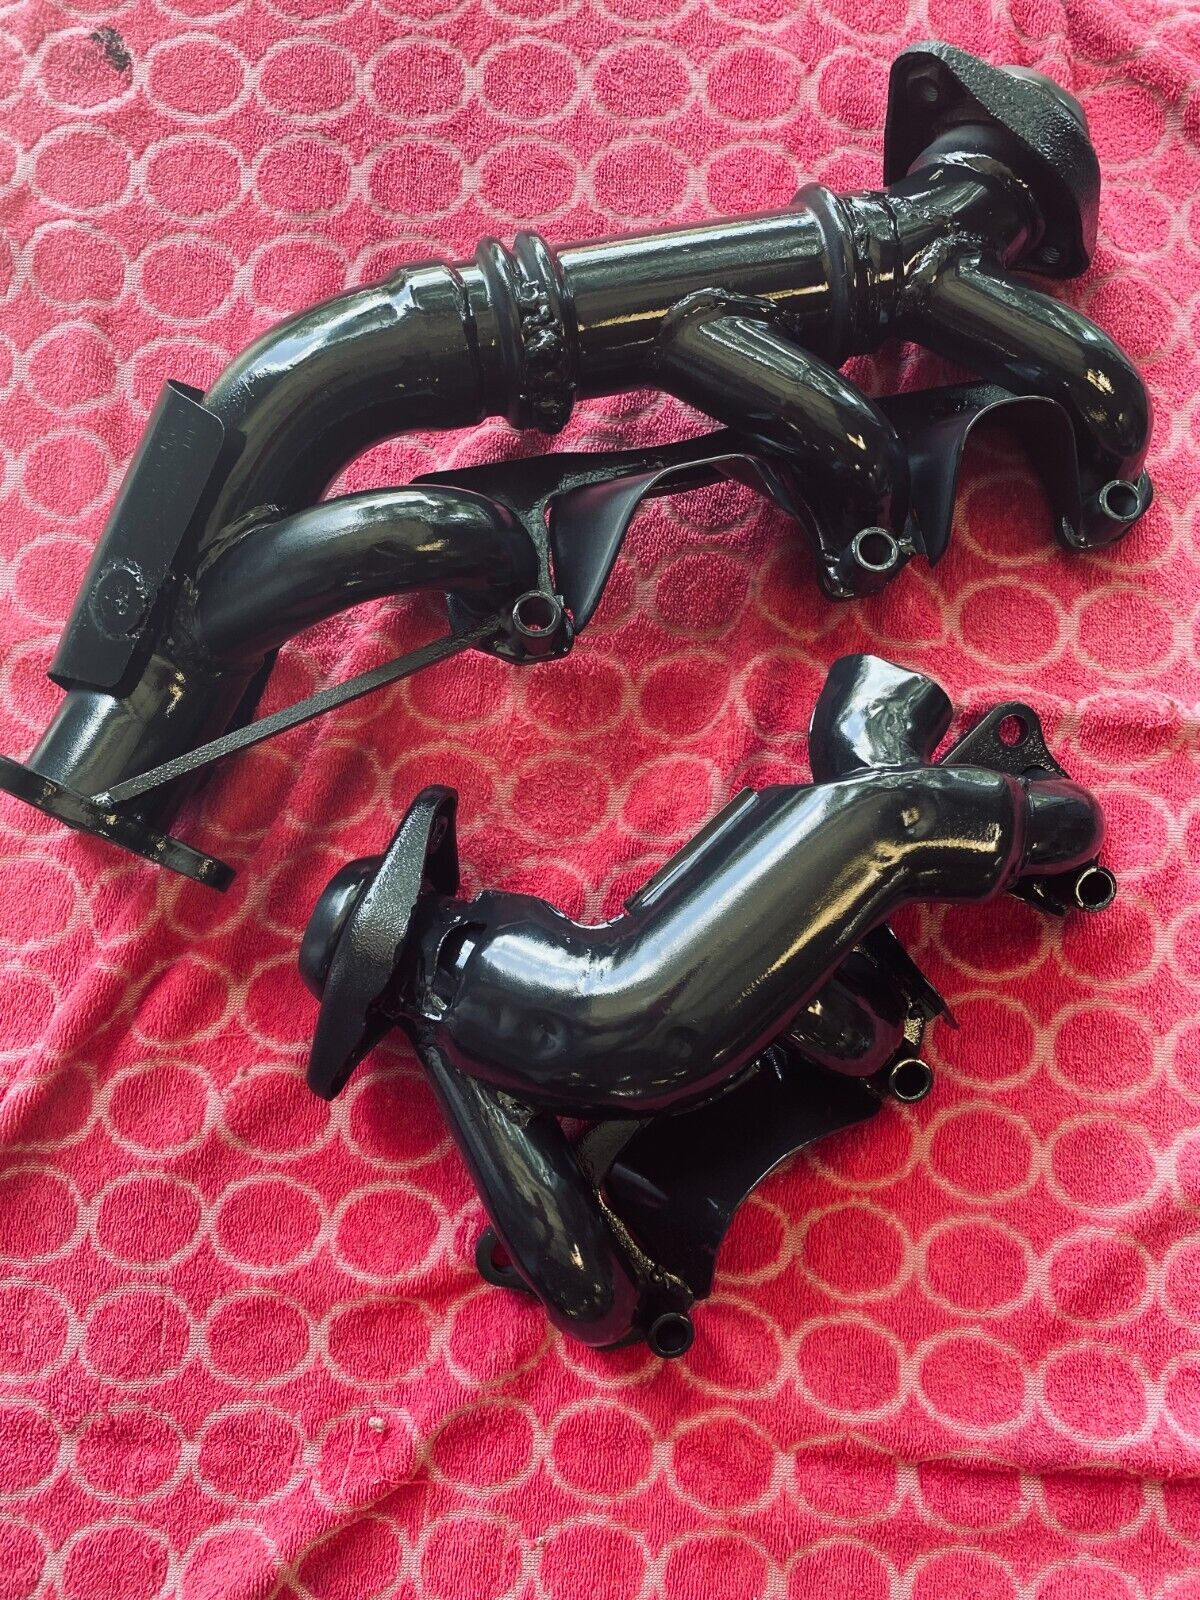 86 87 Buick Turbo Regal Headers with High Temperature Coating - Black